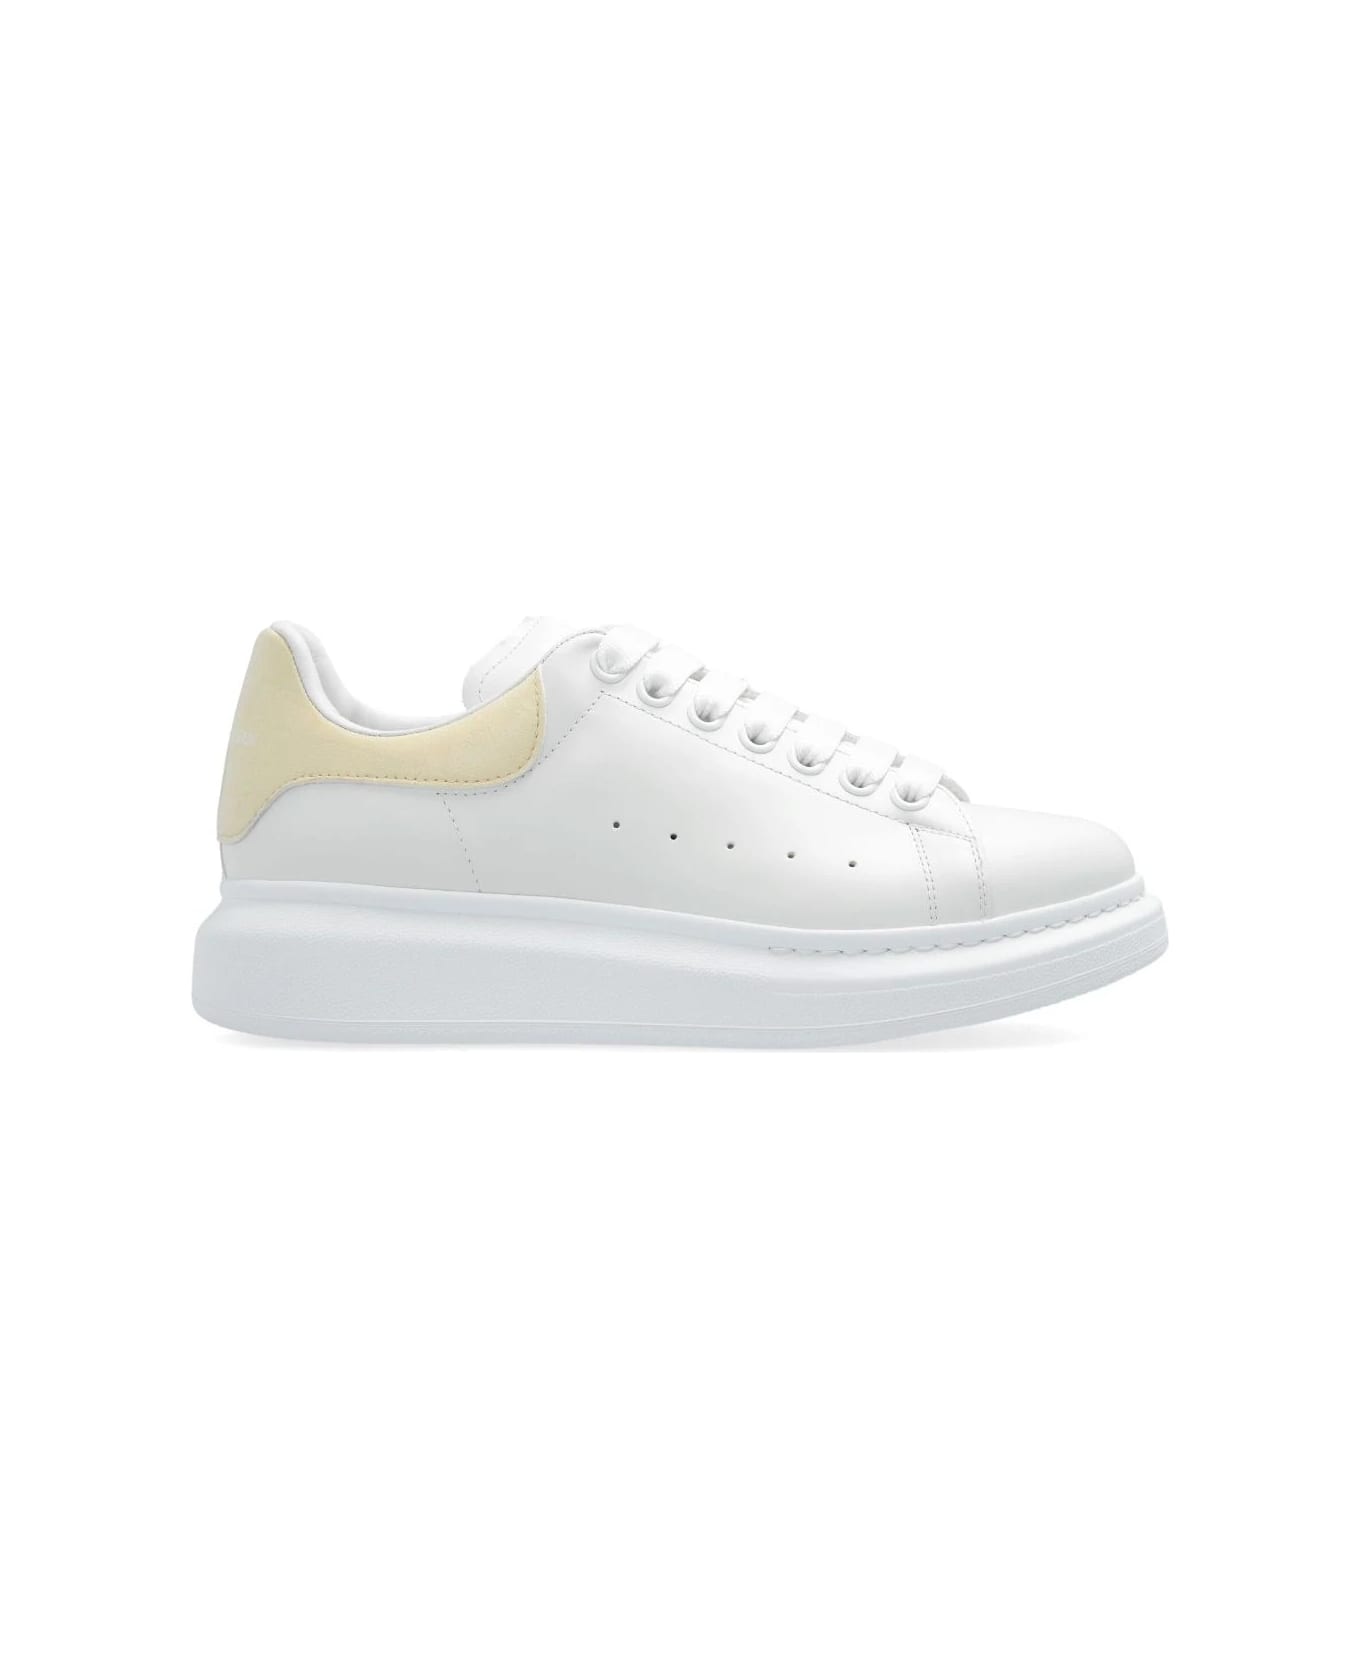 Alexander McQueen White Oversized Sneakers With Yellow Shiny Spoiler - White